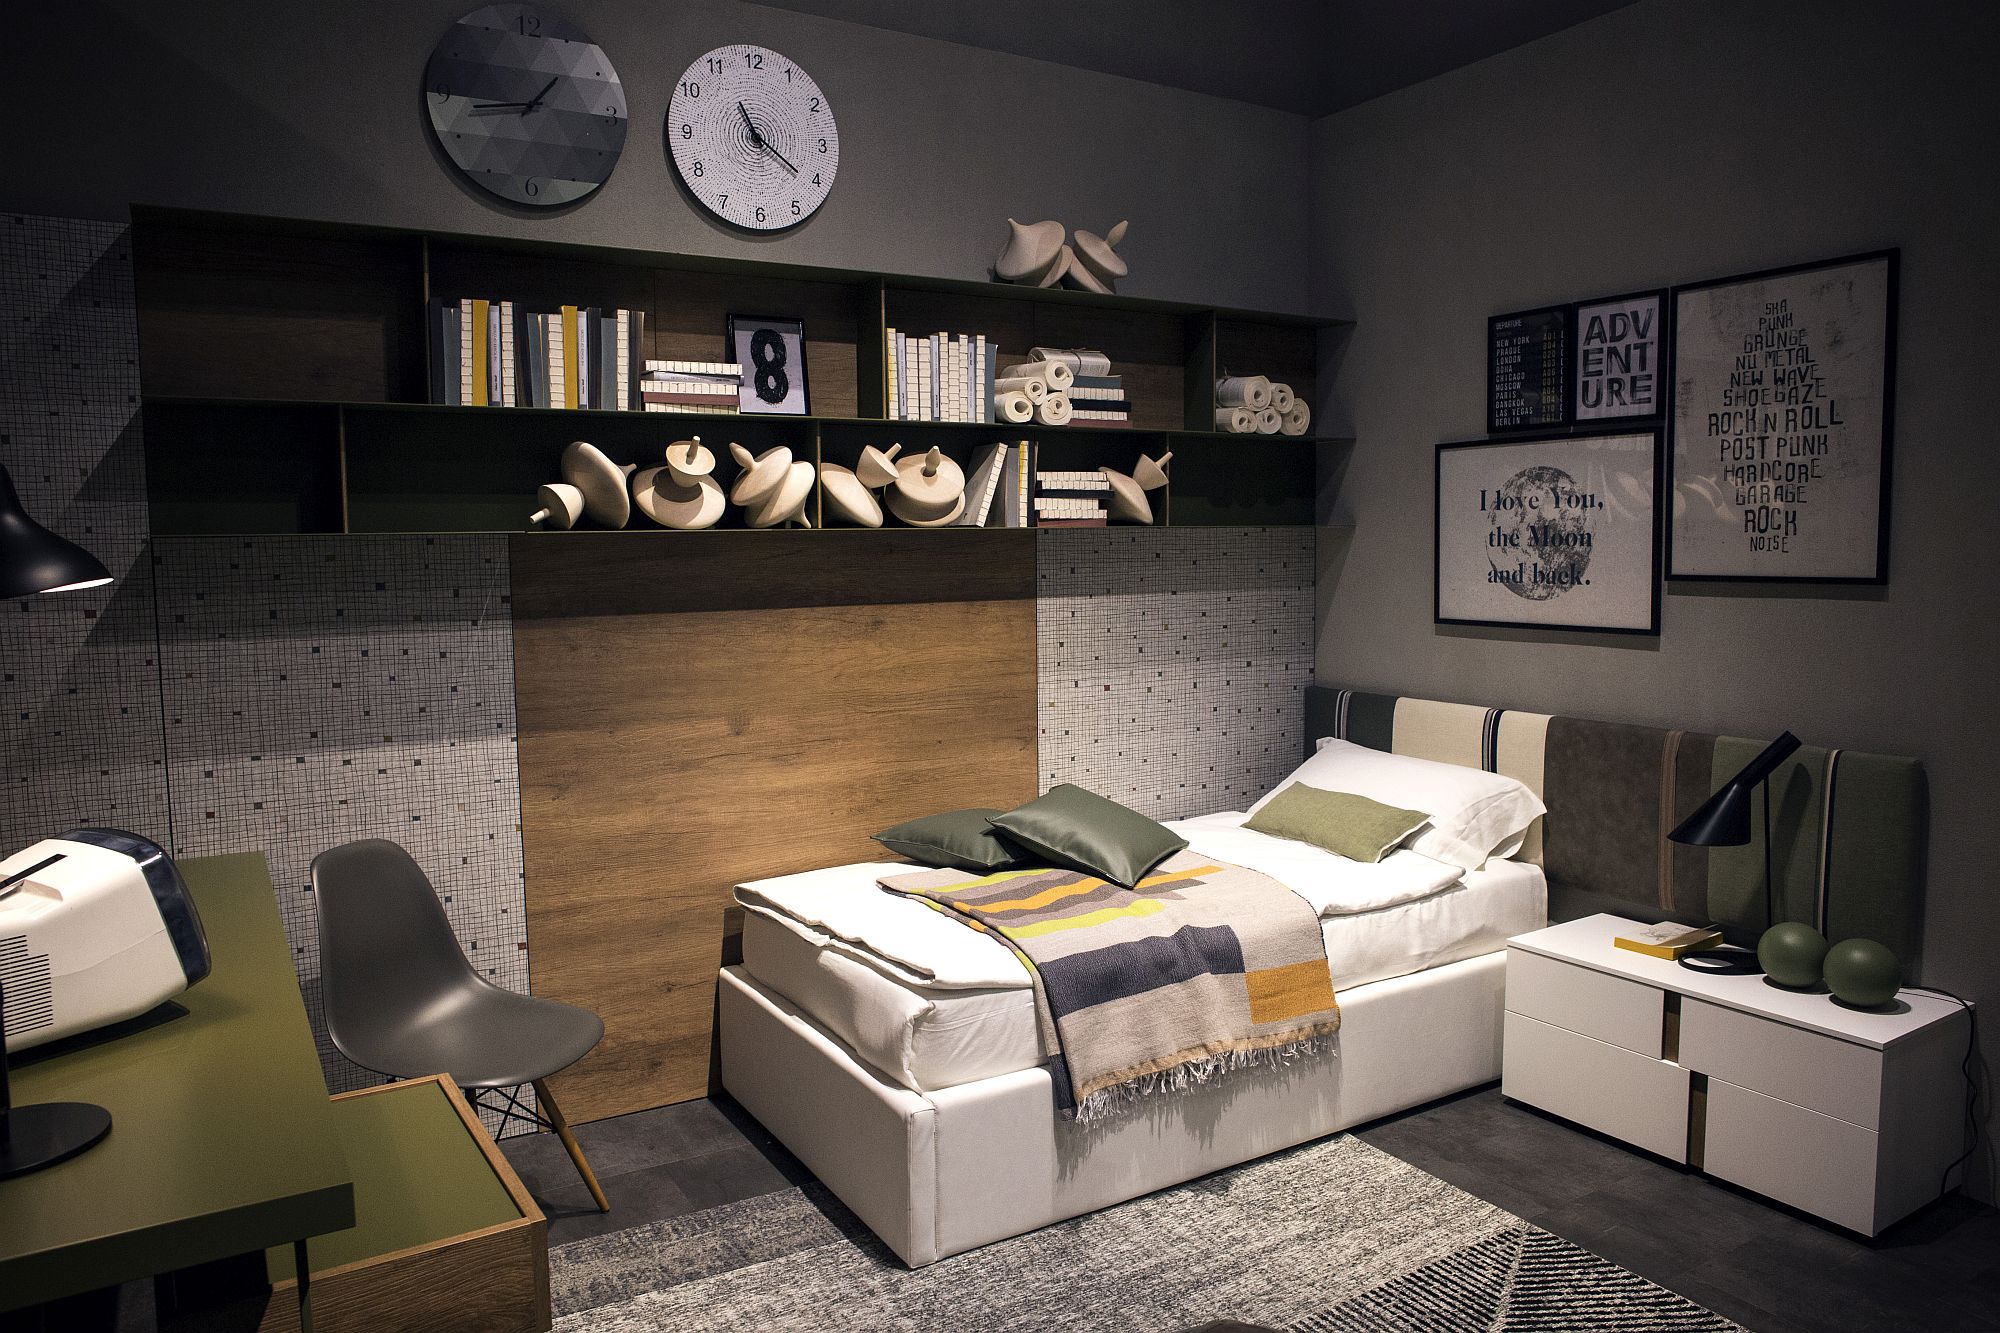 Smart bedroom design relies on spatial arrangment and space-savvy furniture